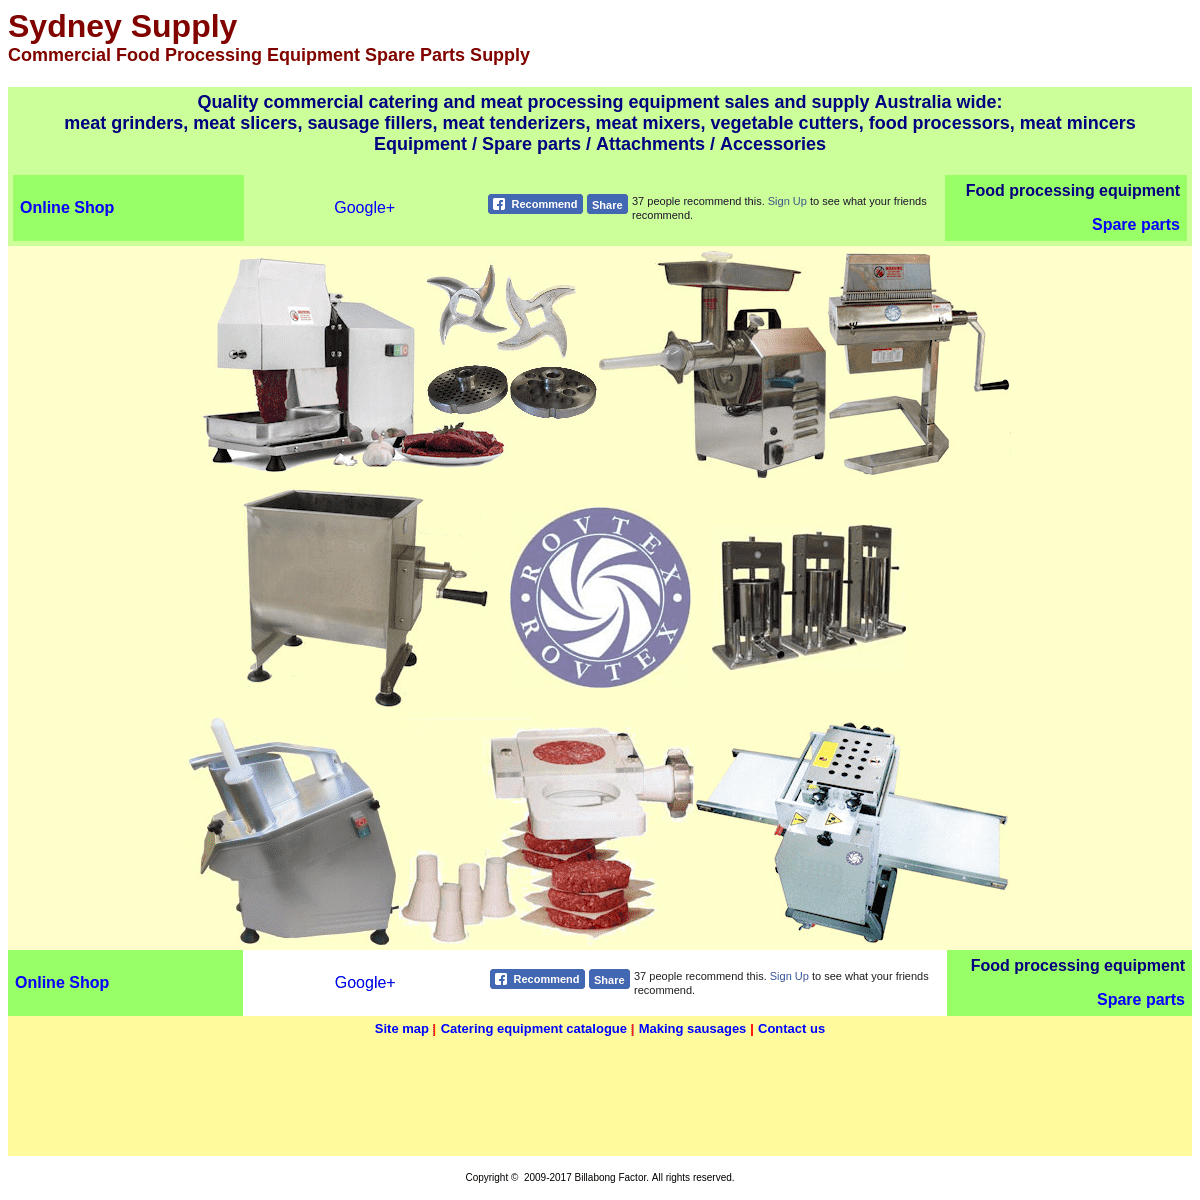 Sydney Supply - Commercial Food Processing Equipment Spare Parts Supply